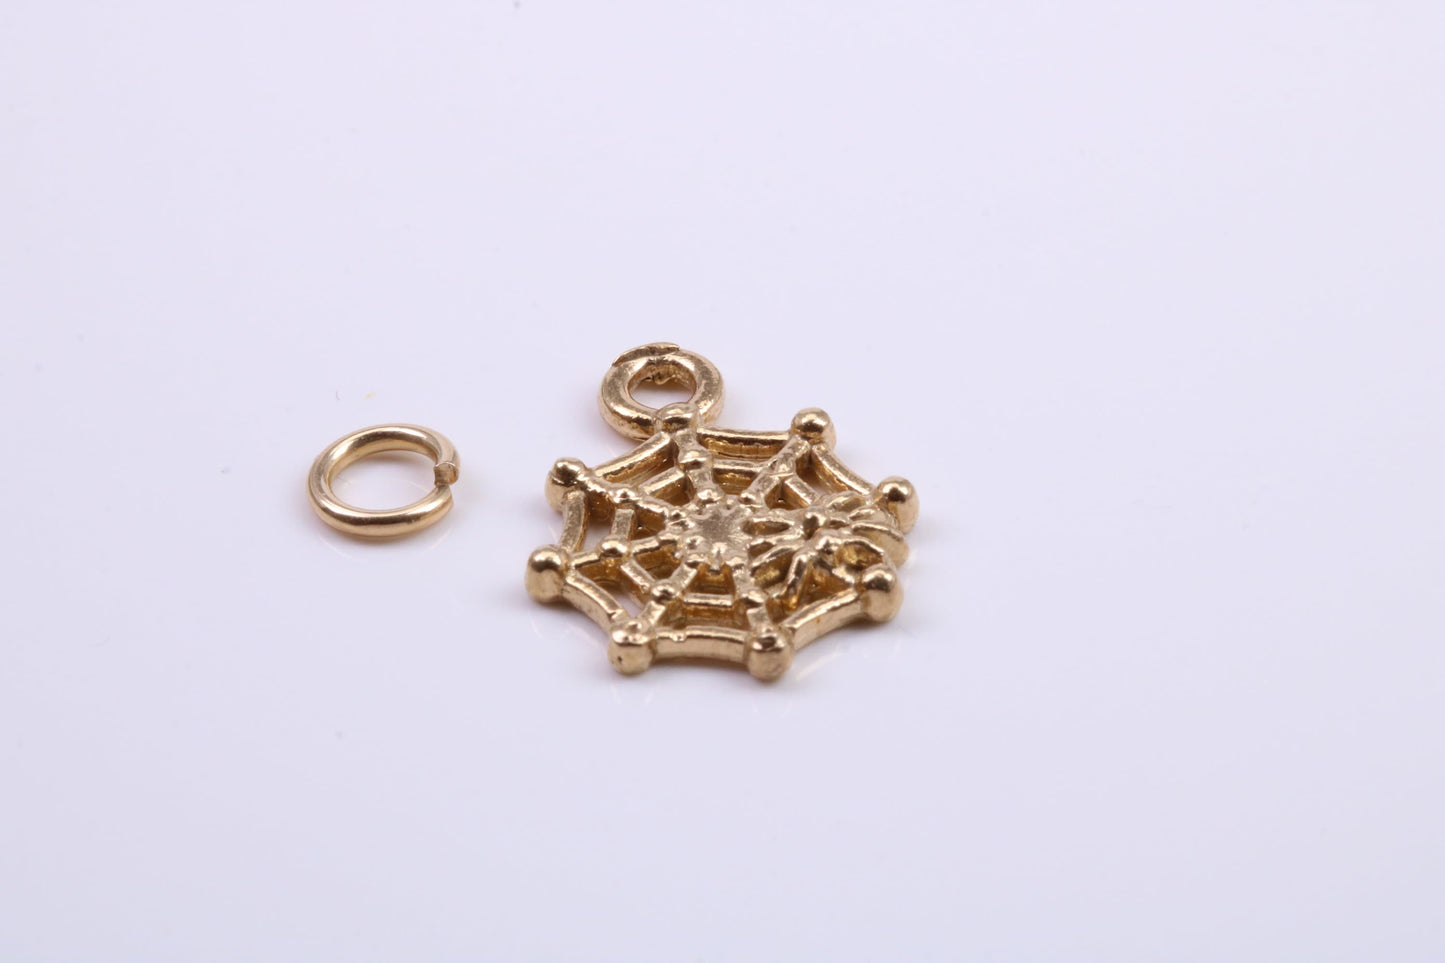 Spider in Web Charm, Traditional Charm, Made from Solid 9ct Yellow Gold, British Hallmarked, Complete with Attachment Link